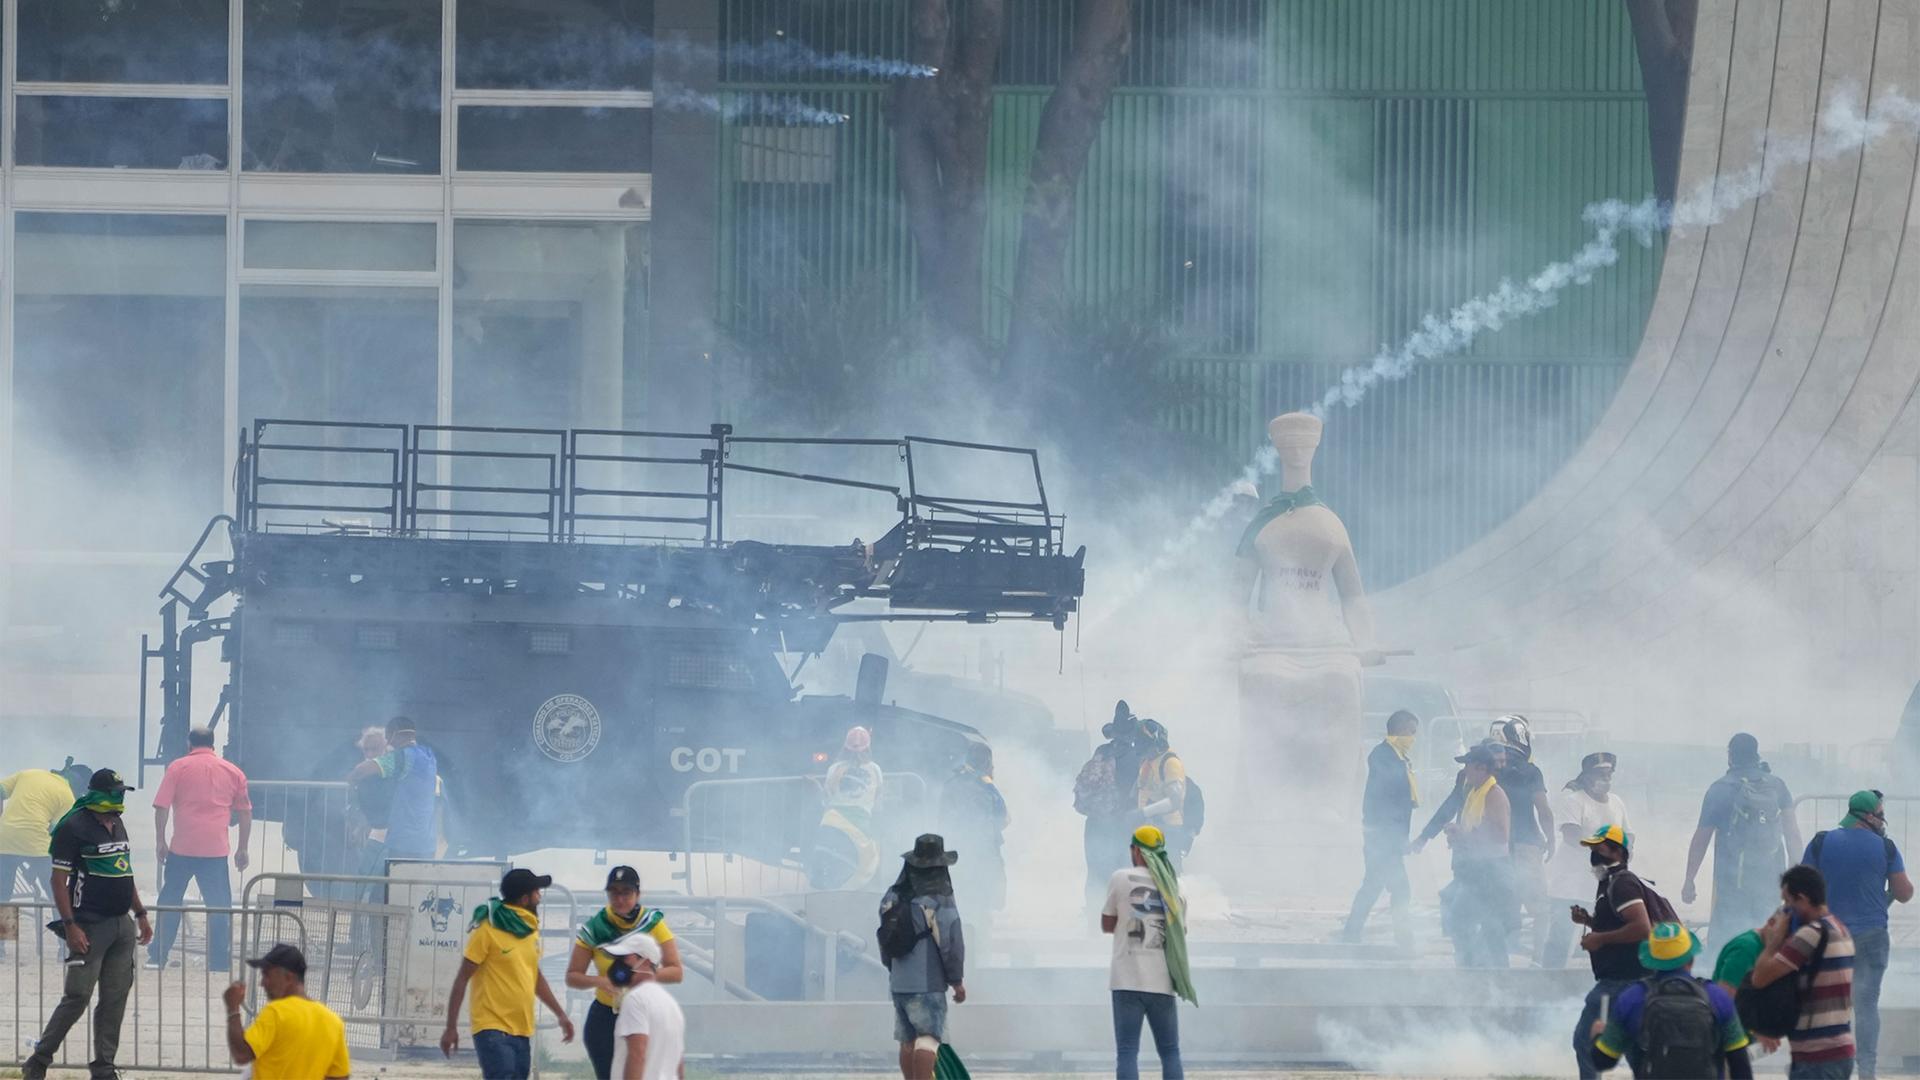 Protesters, supporters of Brazil's former President Jair Bolsonaro, clash with the police after they stormed the Planalto Palace in Brasilia, Brazil, Jan. 8, 2023.